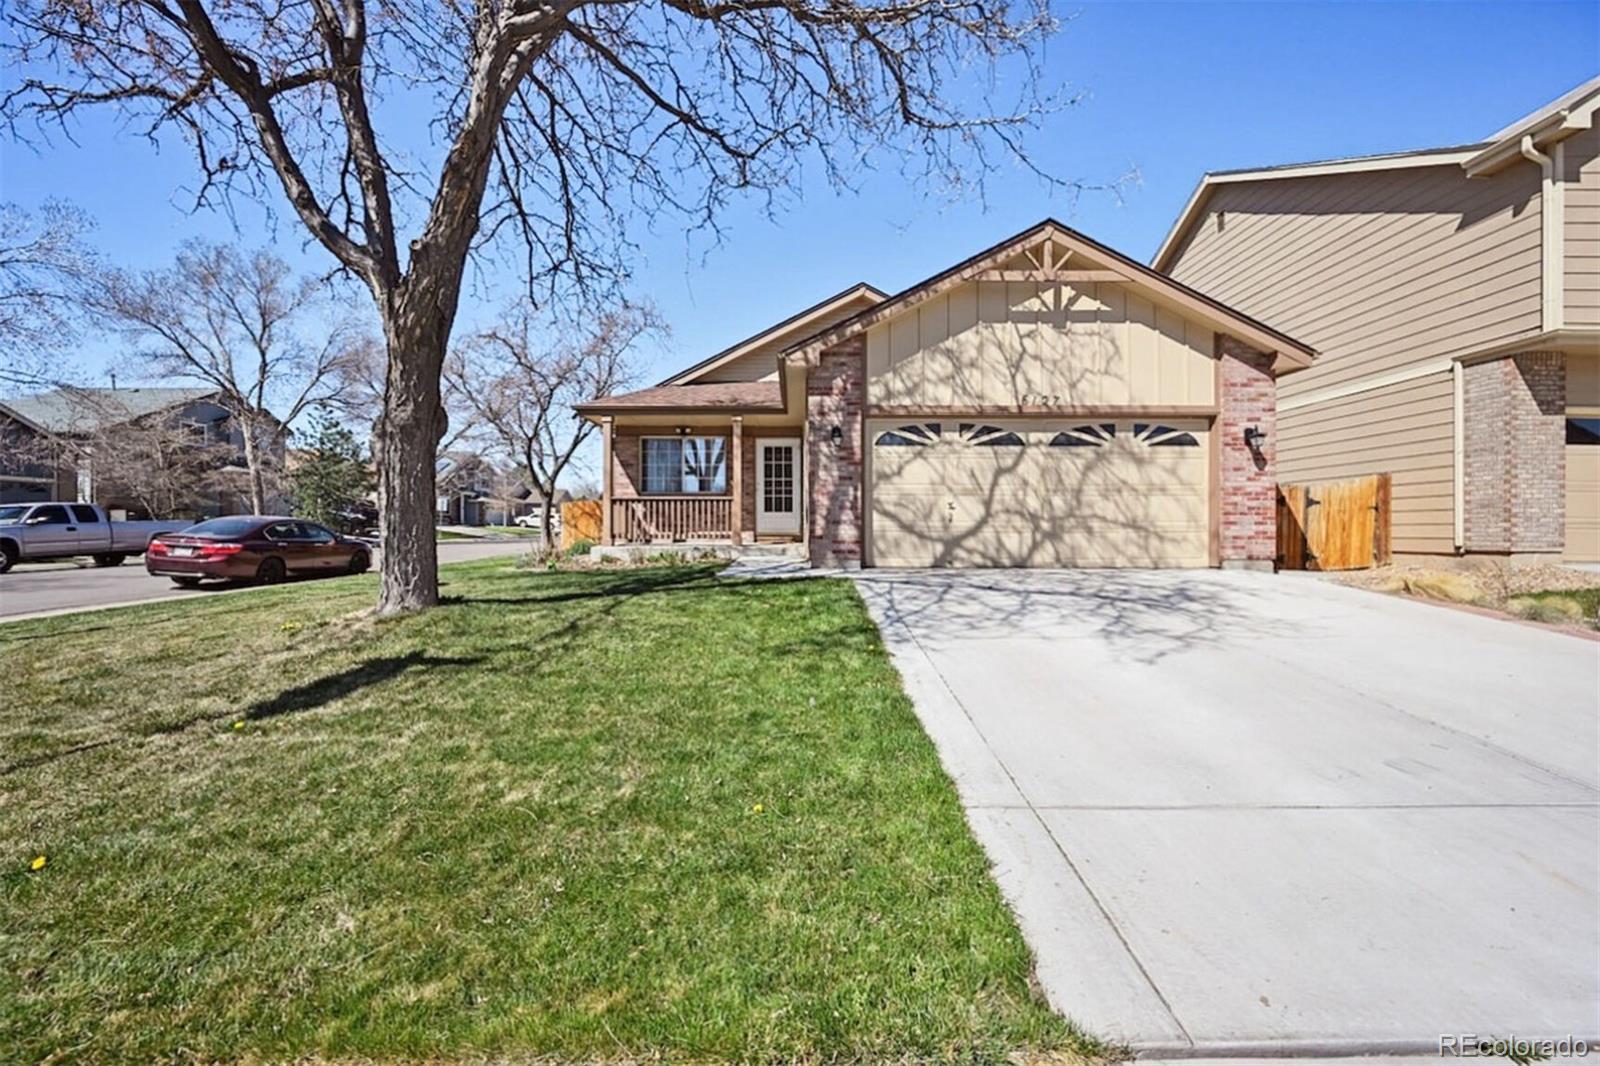 Photo one of 6127 Raleigh St Arvada CO 80003 | MLS 4070429